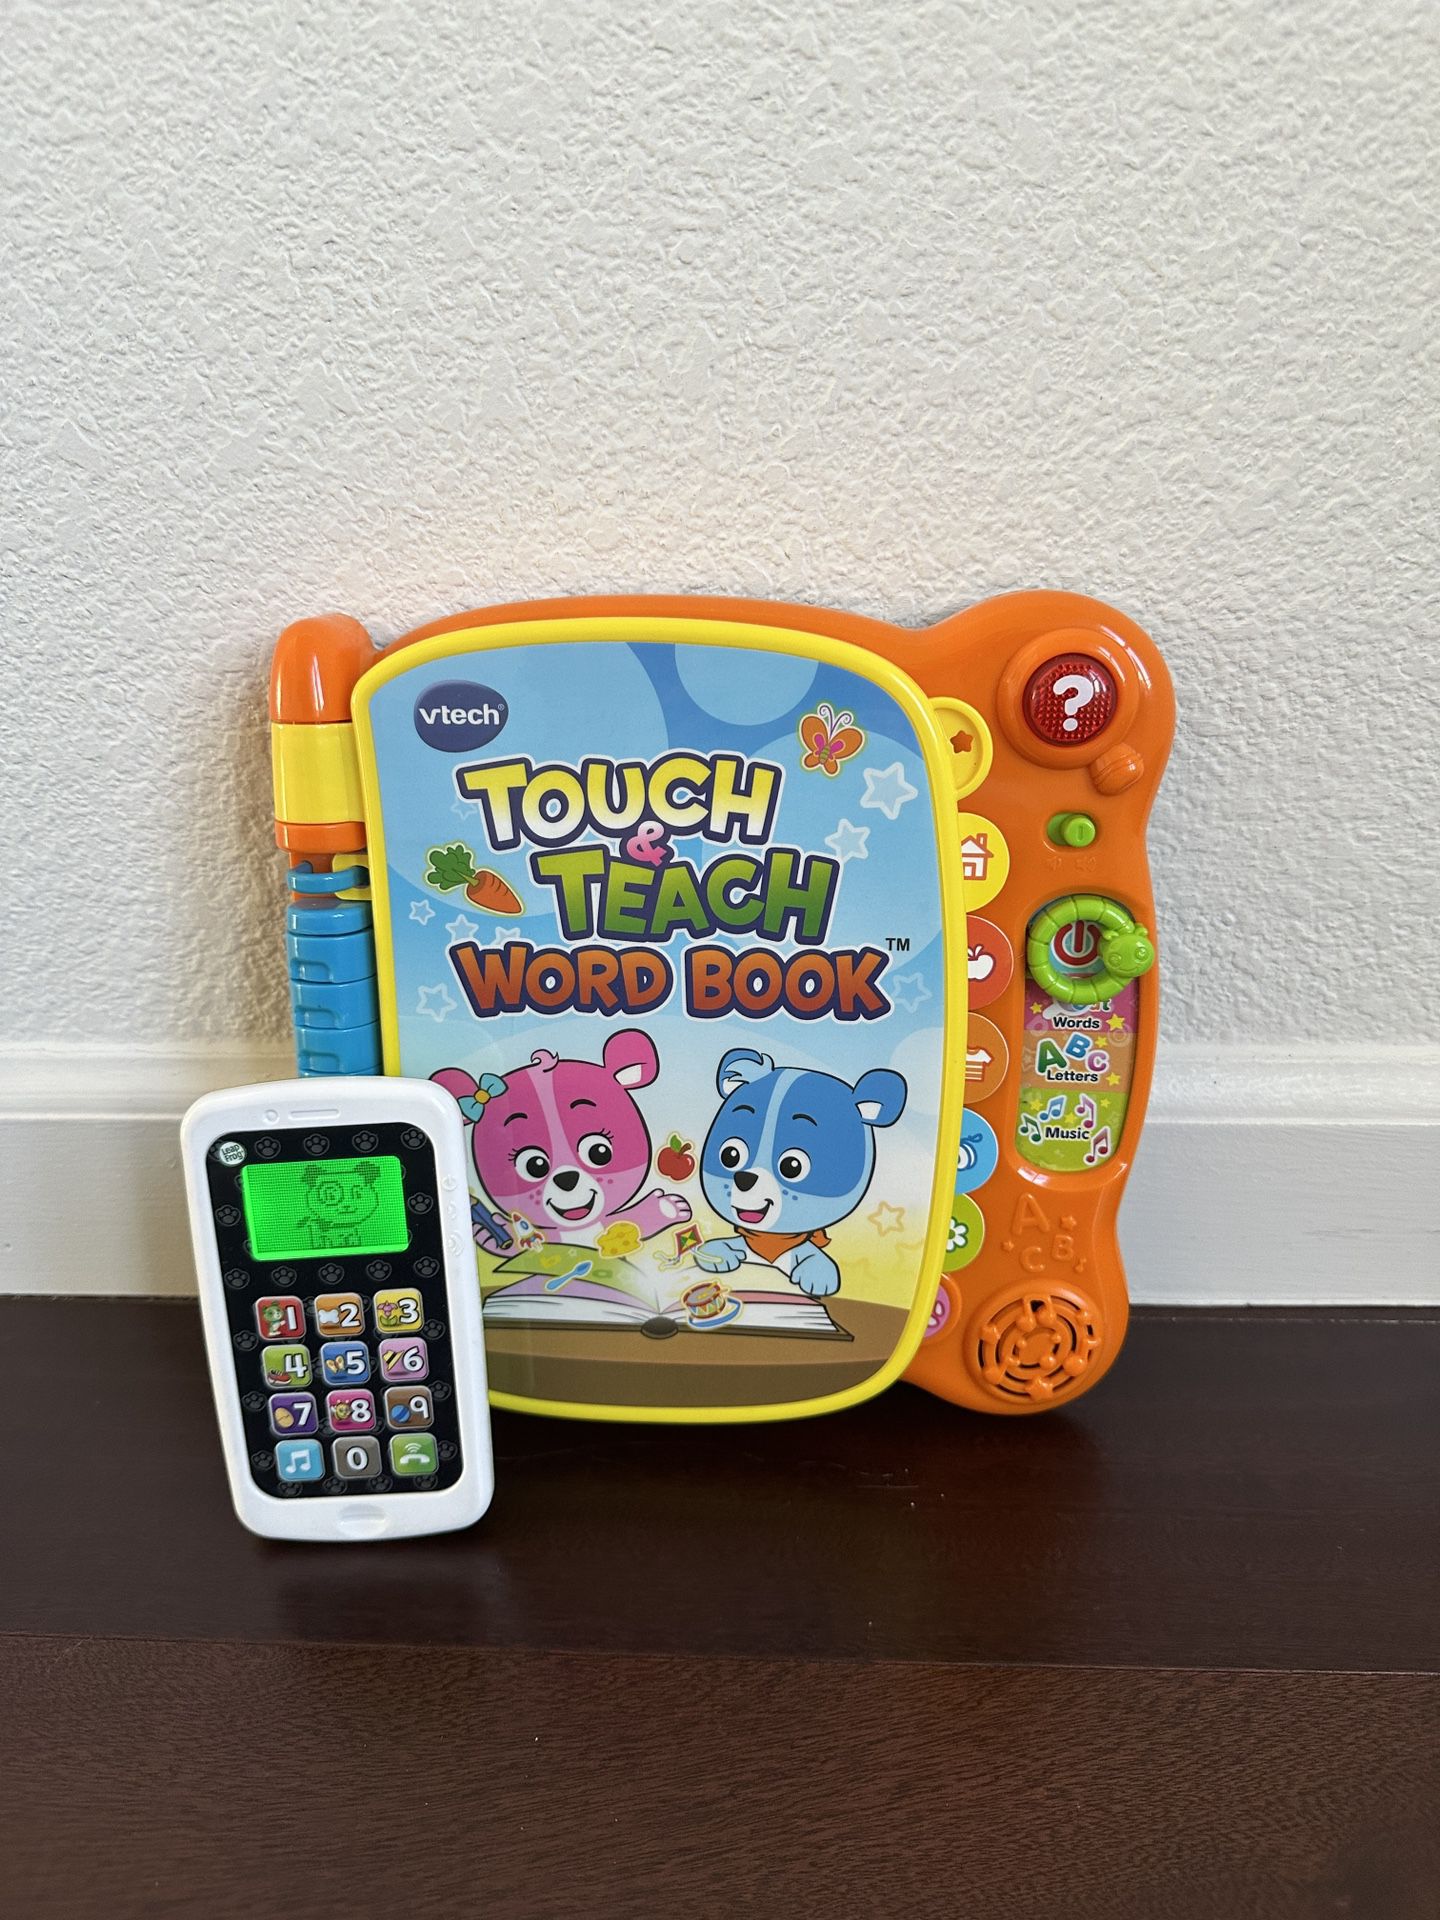 Dual listing: VTech Touch & Teach Word Book AND LeapFrog Chat and Count Smart Phone, Scout, Green